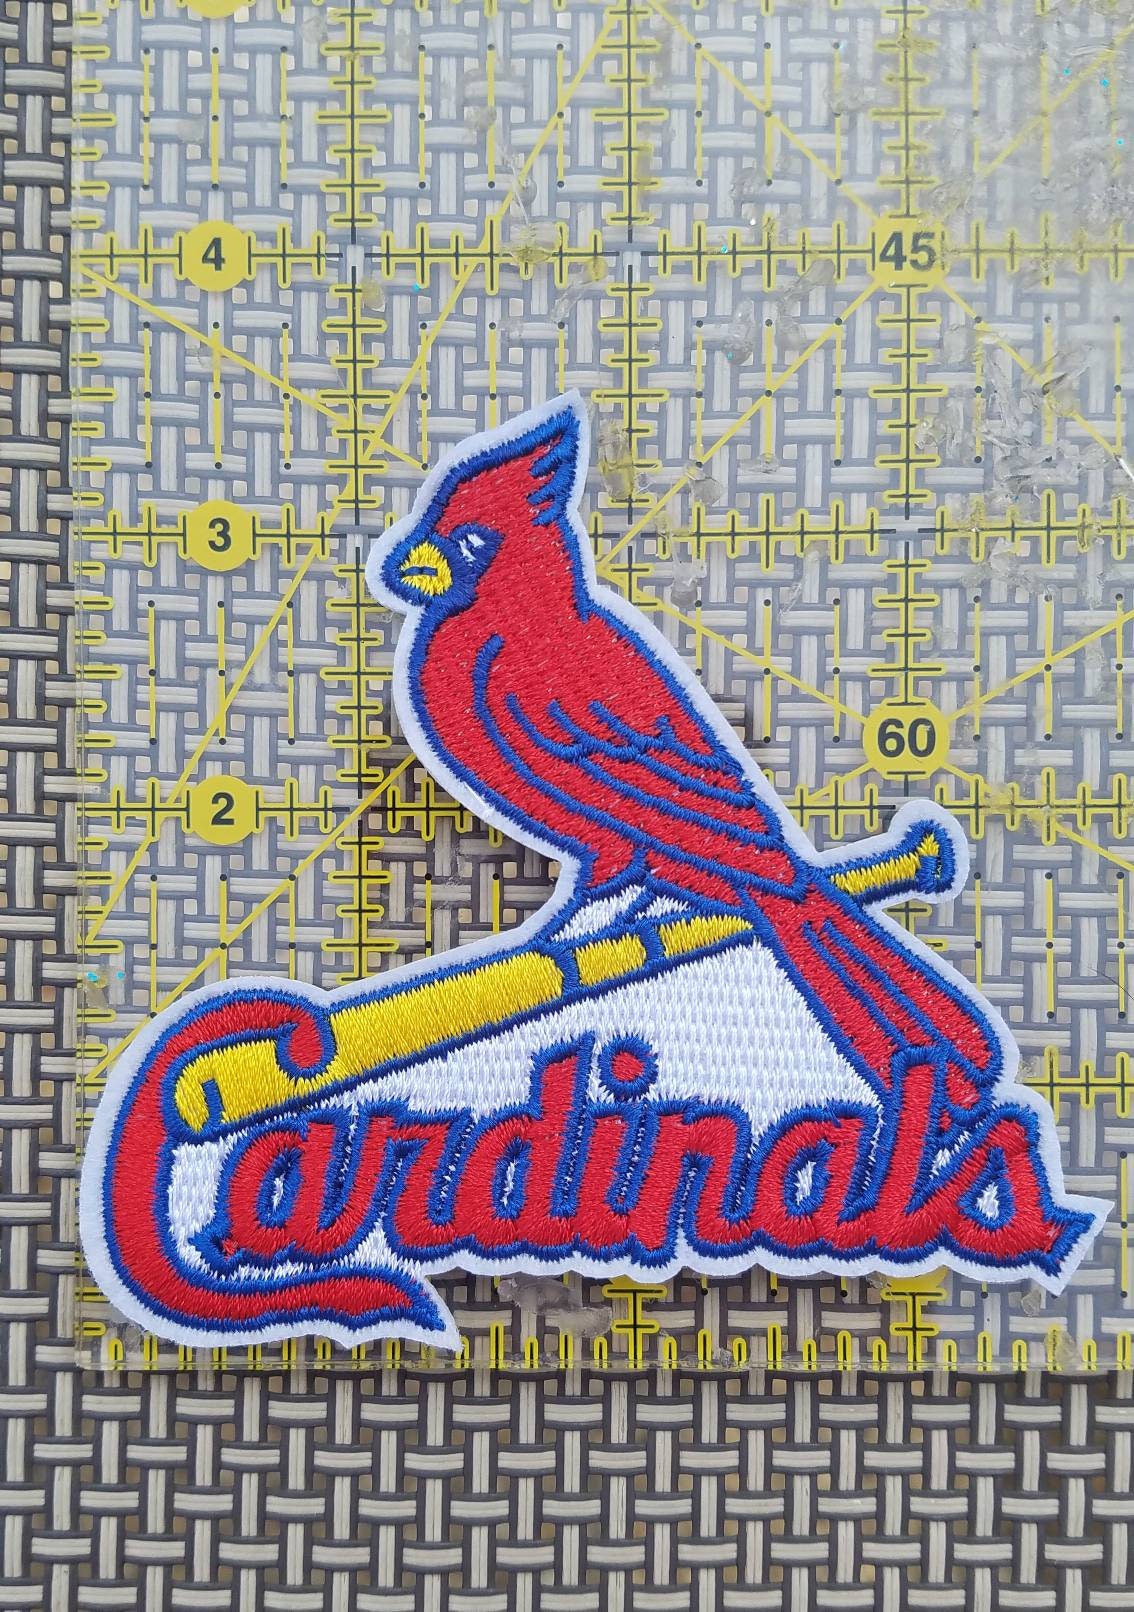 1 VINTAGE ST. LOUIS CARDINALS MLB BASEBALL PLAYER CREST PATCH MINT IN –  UNITED PATCHES